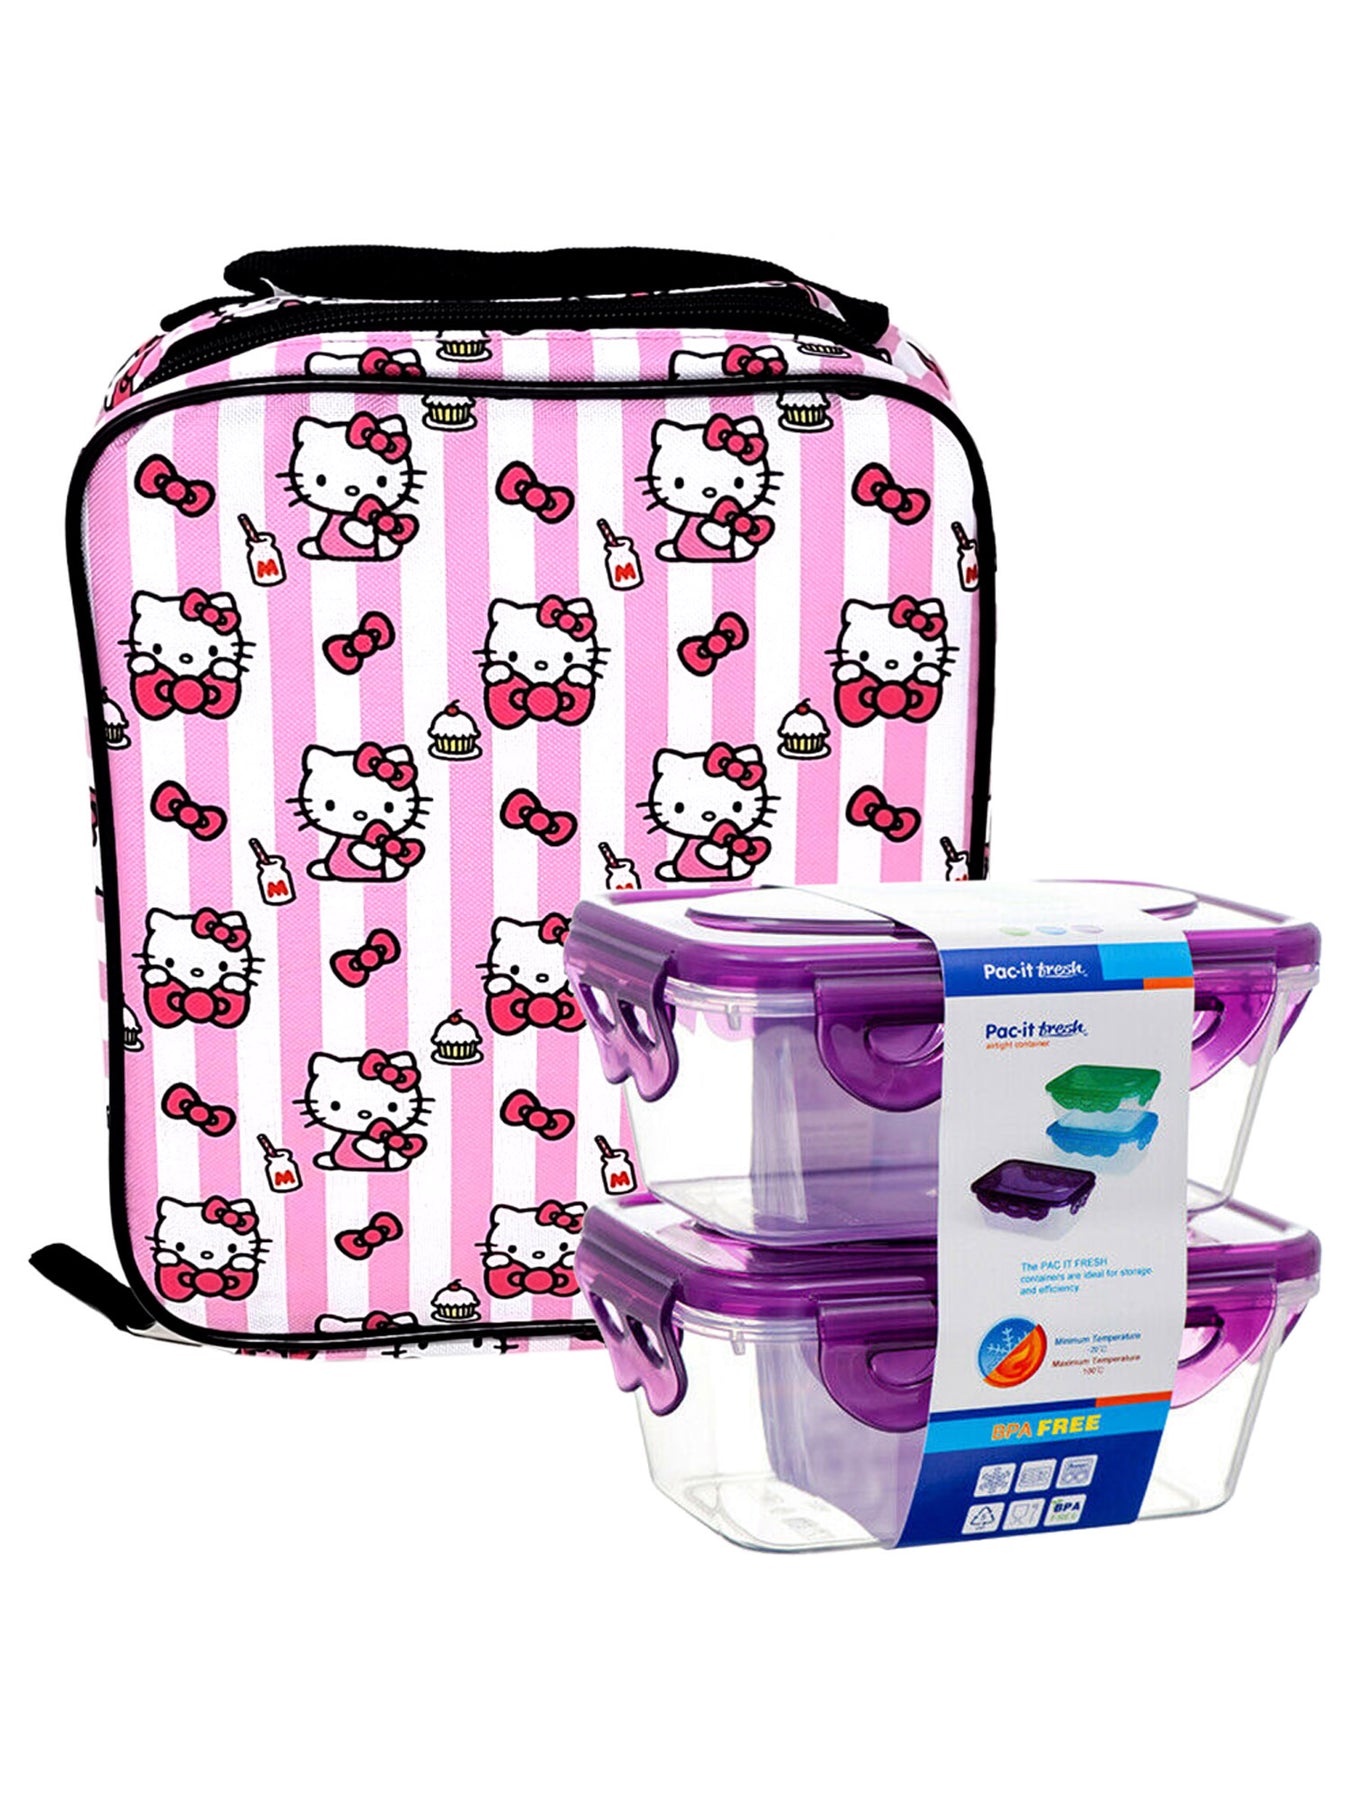 14 Inches Hello Kitty STAR Pink Small Backpack With Lunch Bag